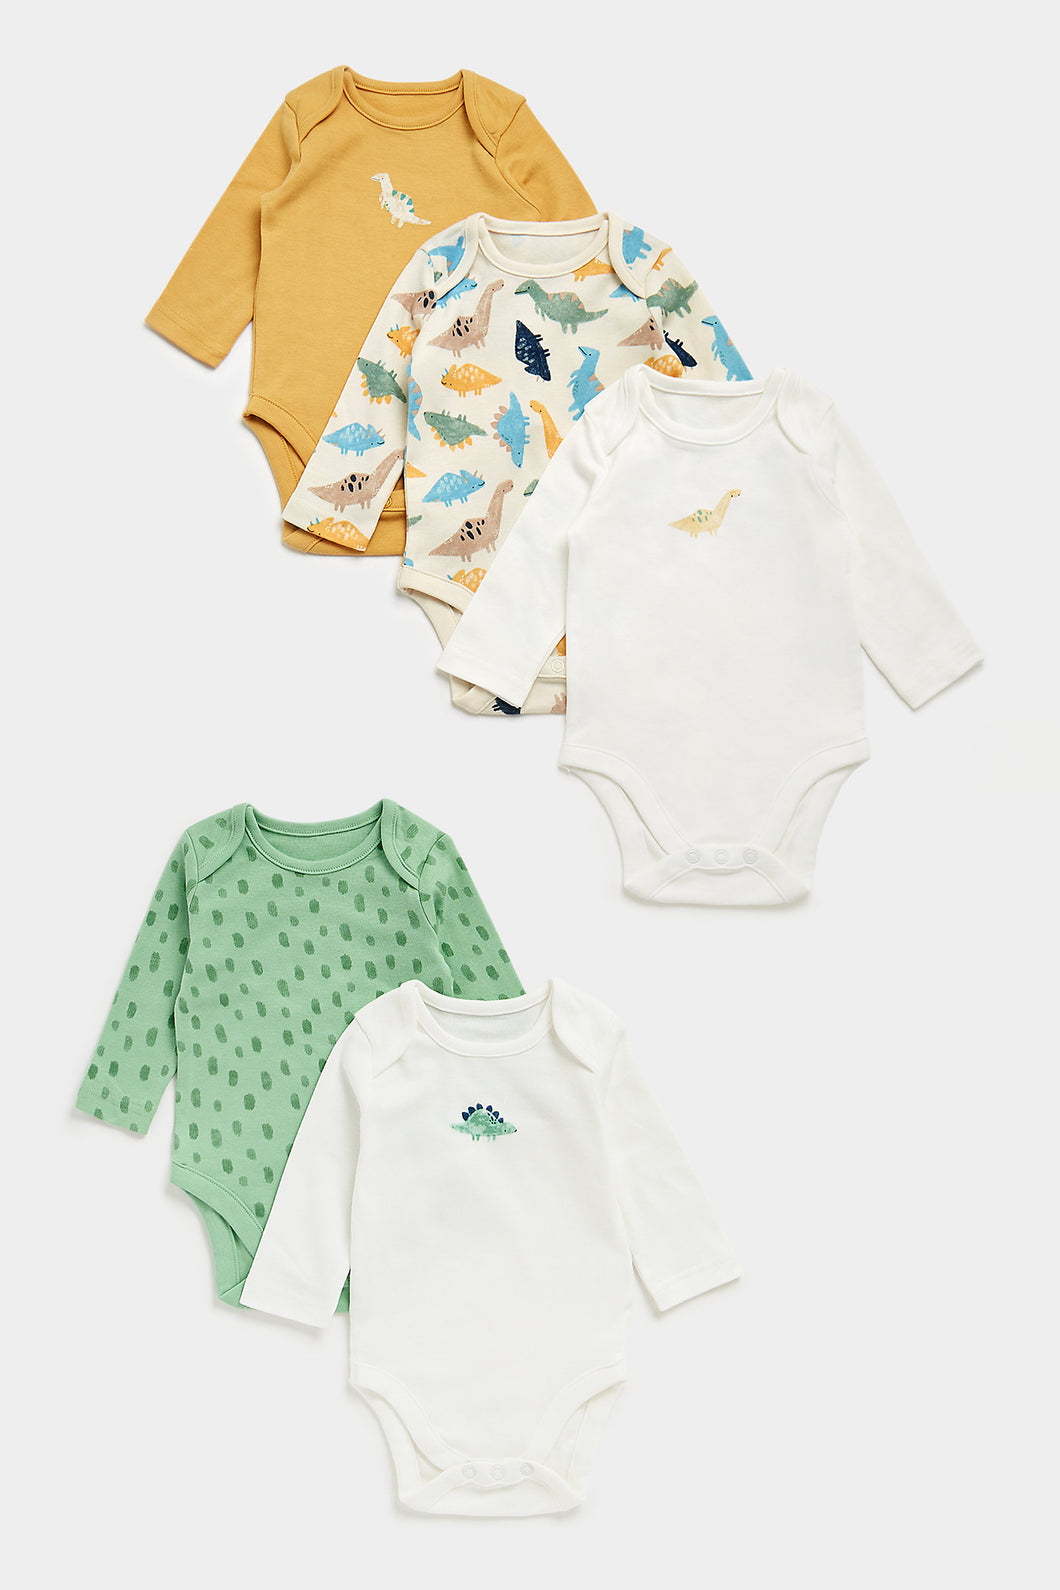 Mothercare Dinosaur Long-Sleeved Baby Bodysuits - 5 Pack